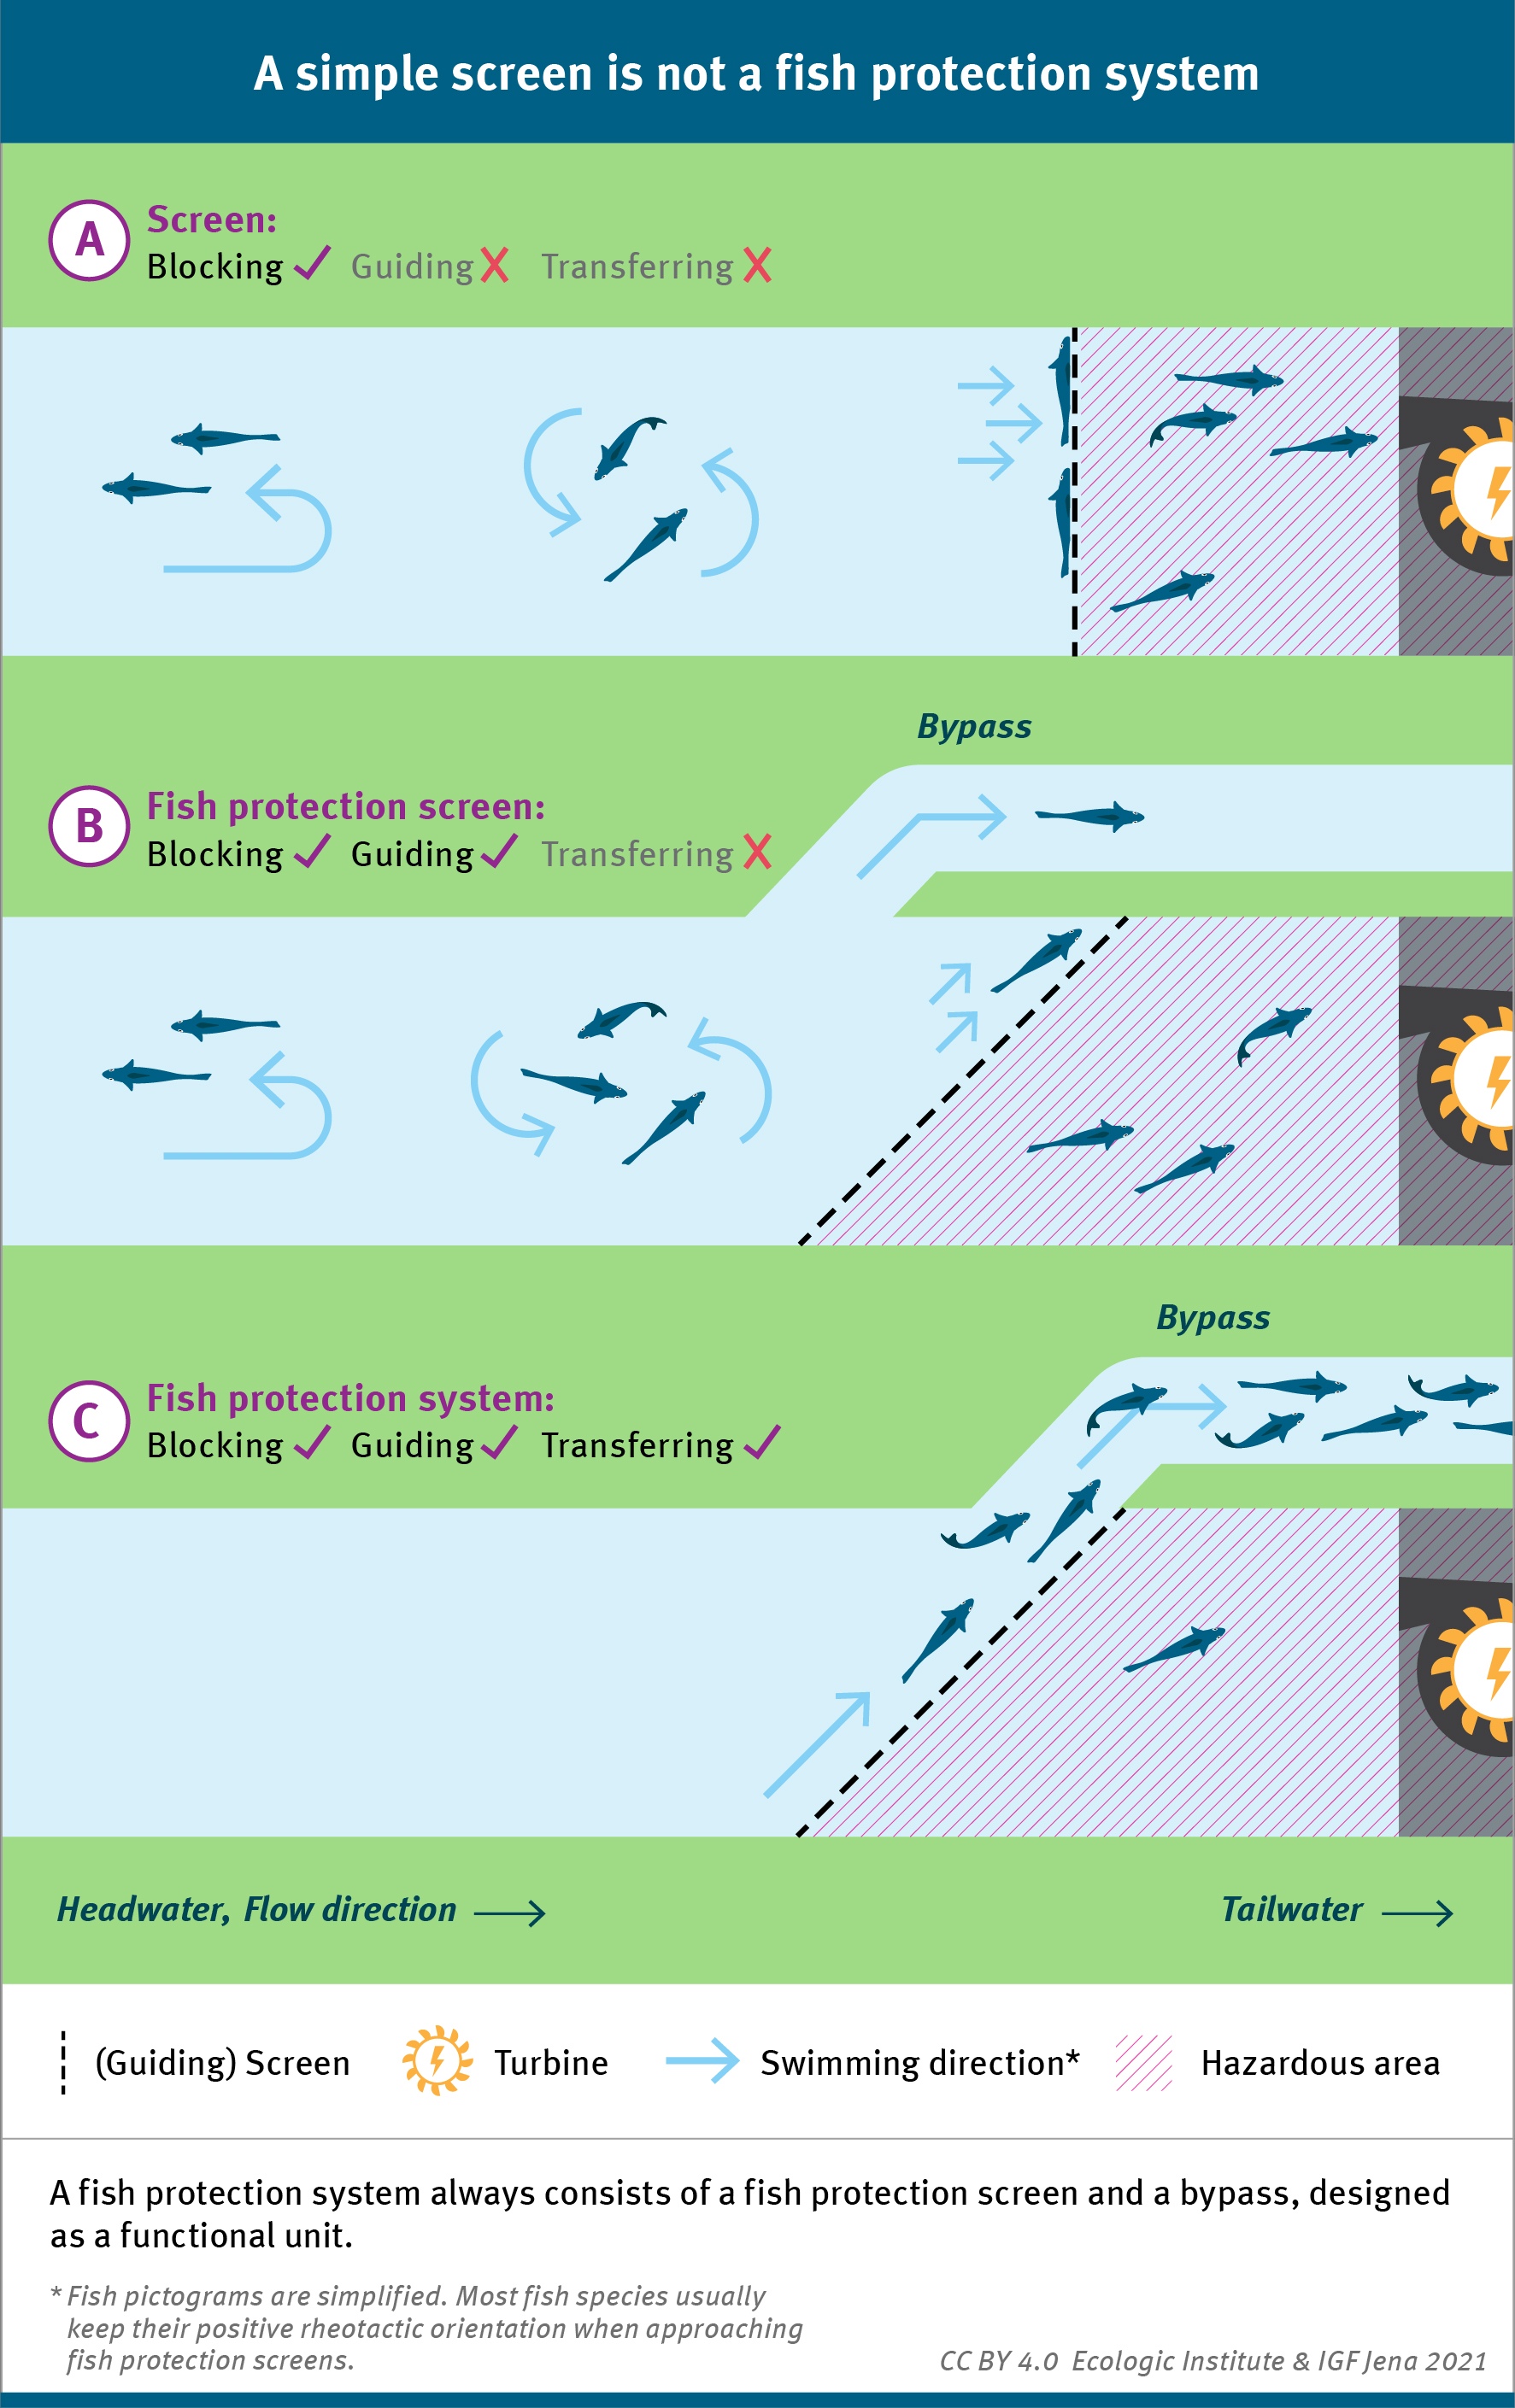 A fish protection system always consists of a fish protection screen and a bypass, designed as a functional unit. This infographic shows and explains the components. 